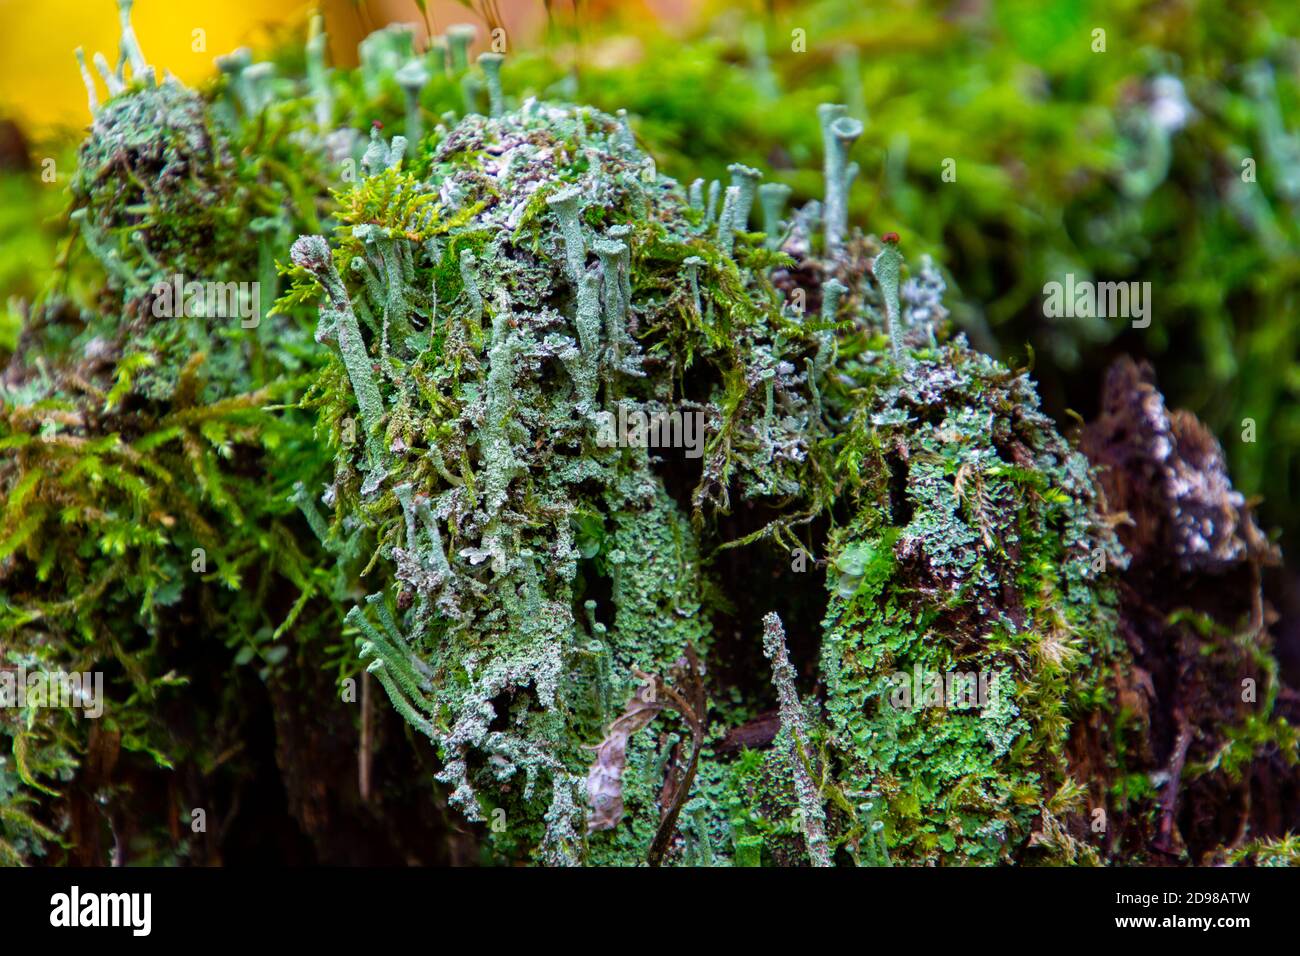 Tree stump overgrown with moss and trumpet pixie lichen or cladonia fimbriata Stock Photo